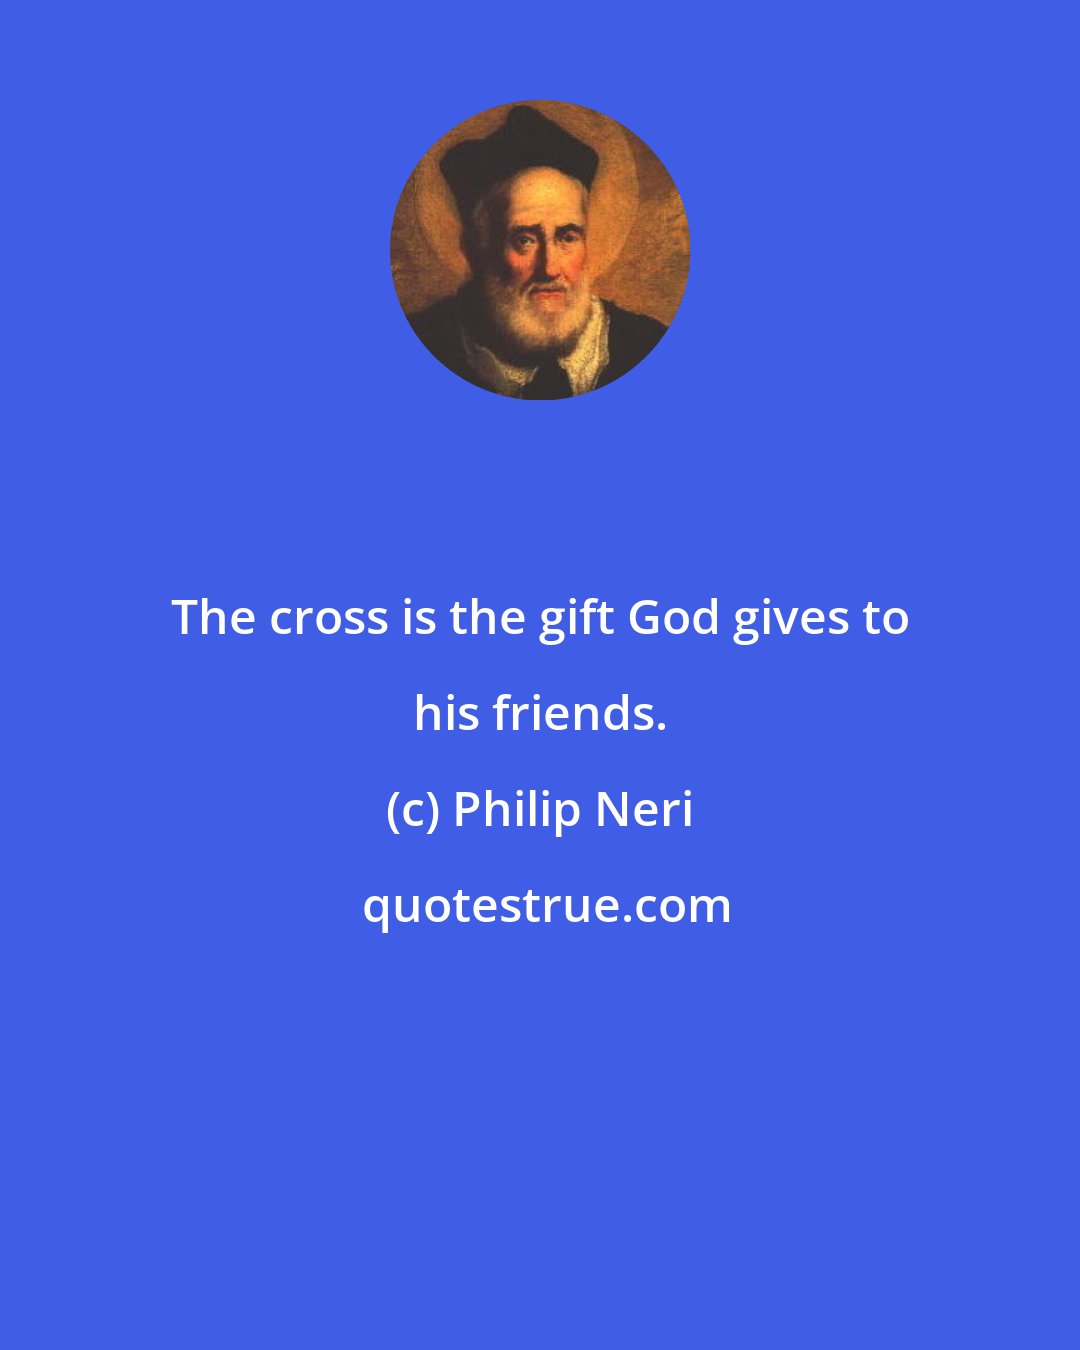 Philip Neri: The cross is the gift God gives to his friends.